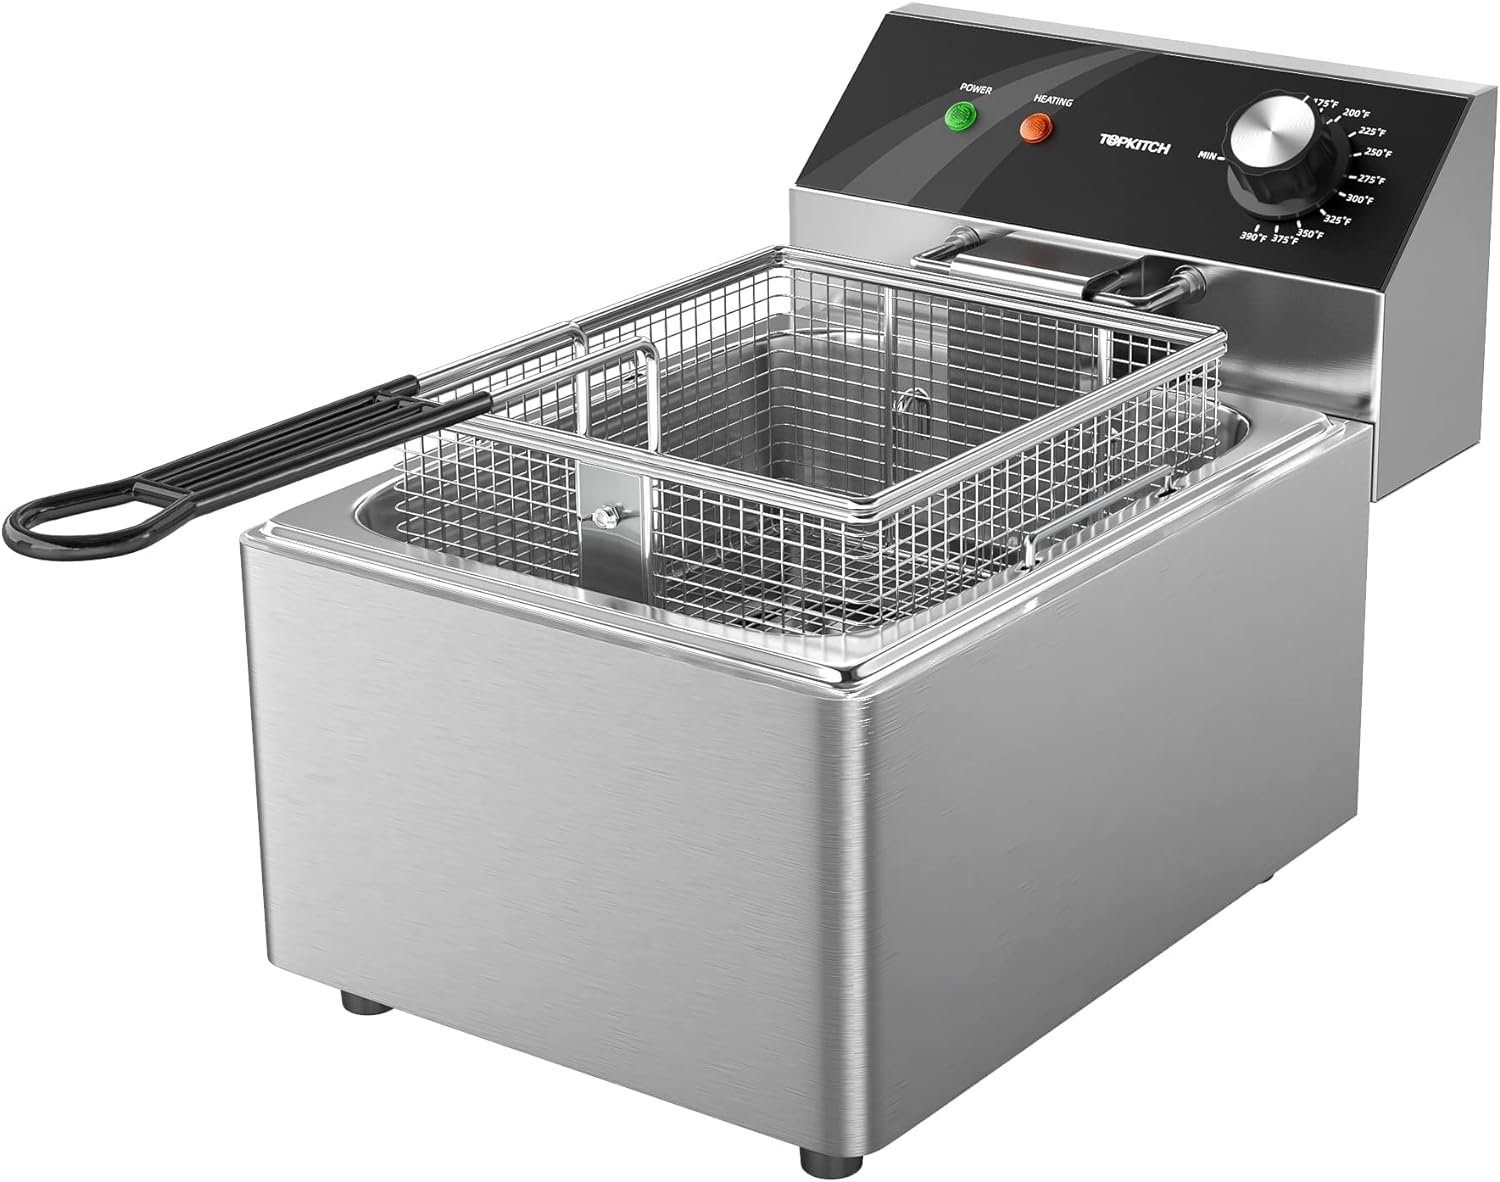 TOPKITCH Electric Deep Fryer Countertop Deep Fryer with Basket and Lid Capacity 10L(10.5QT) Stainless Steel Single Tank Fryer for Home Use Easy to Clean Oil Fryers 1800 Watts, 120V